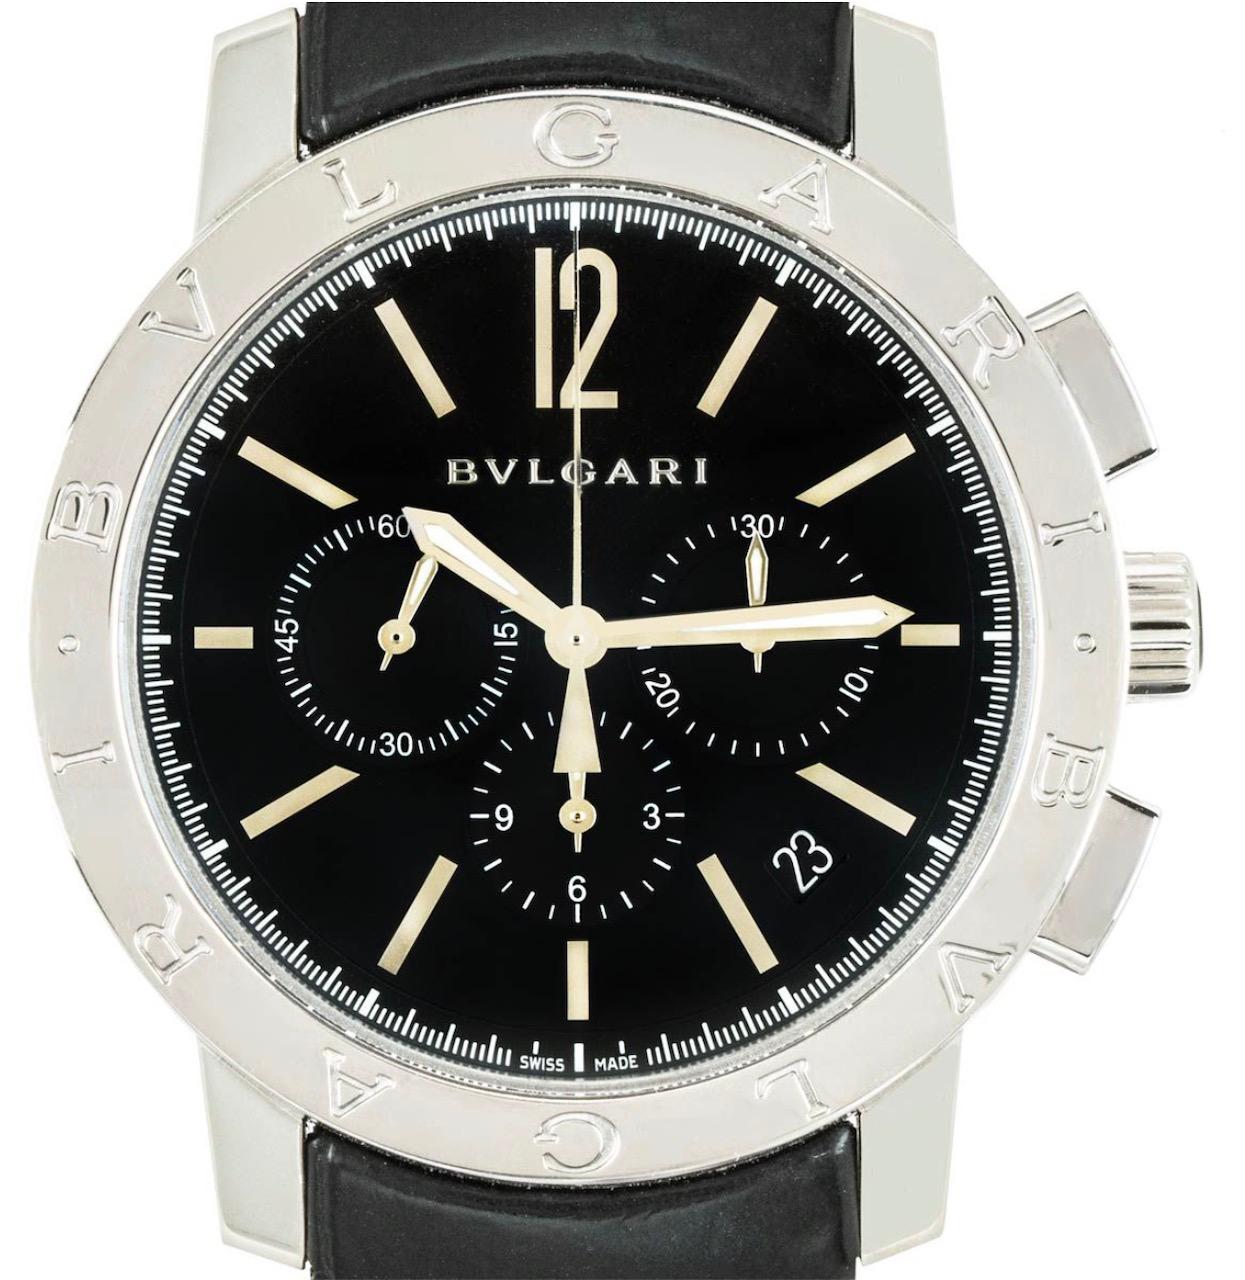 A men's 41mm stainless steel Chronograph wristwatch by Bvlgari. Features a black dial with applied hour markers, chronograph counters and a fixed stainless steel bezel set with the Bvlgari logo. The watch is further fitted with a sapphire glass, a